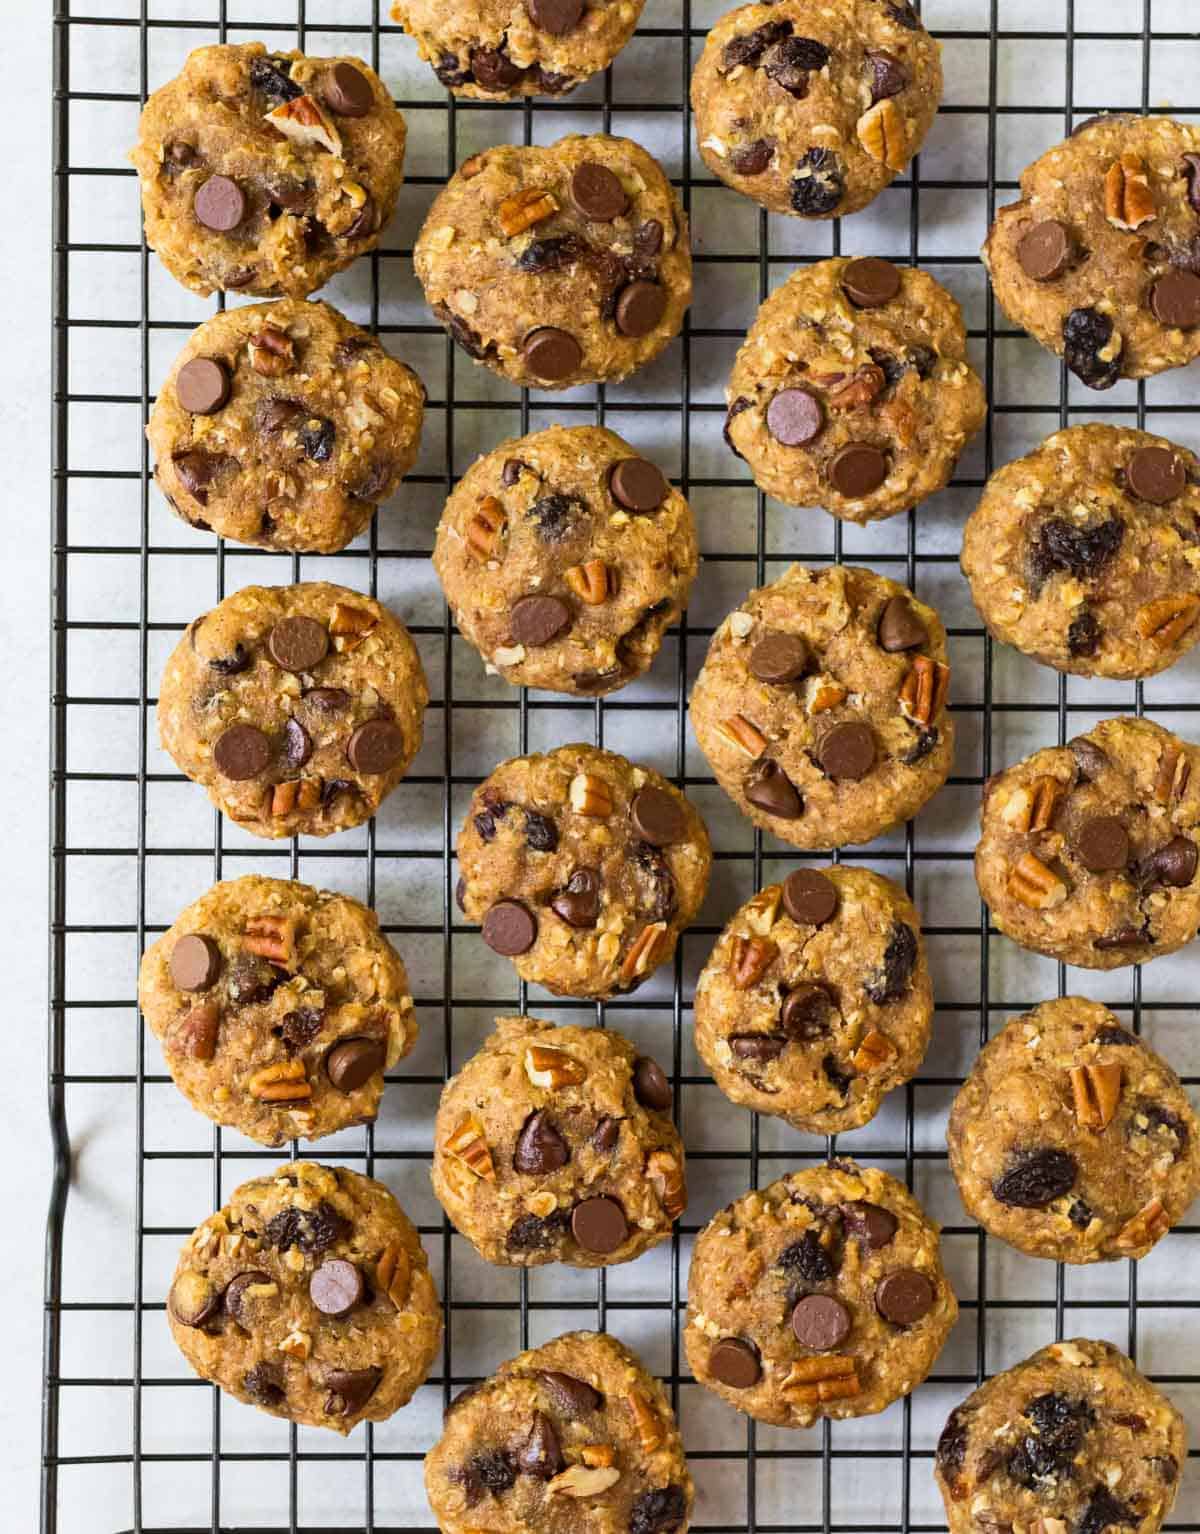 Delicious and chewy cookies with chocolate chips and nuts on a cooling rack